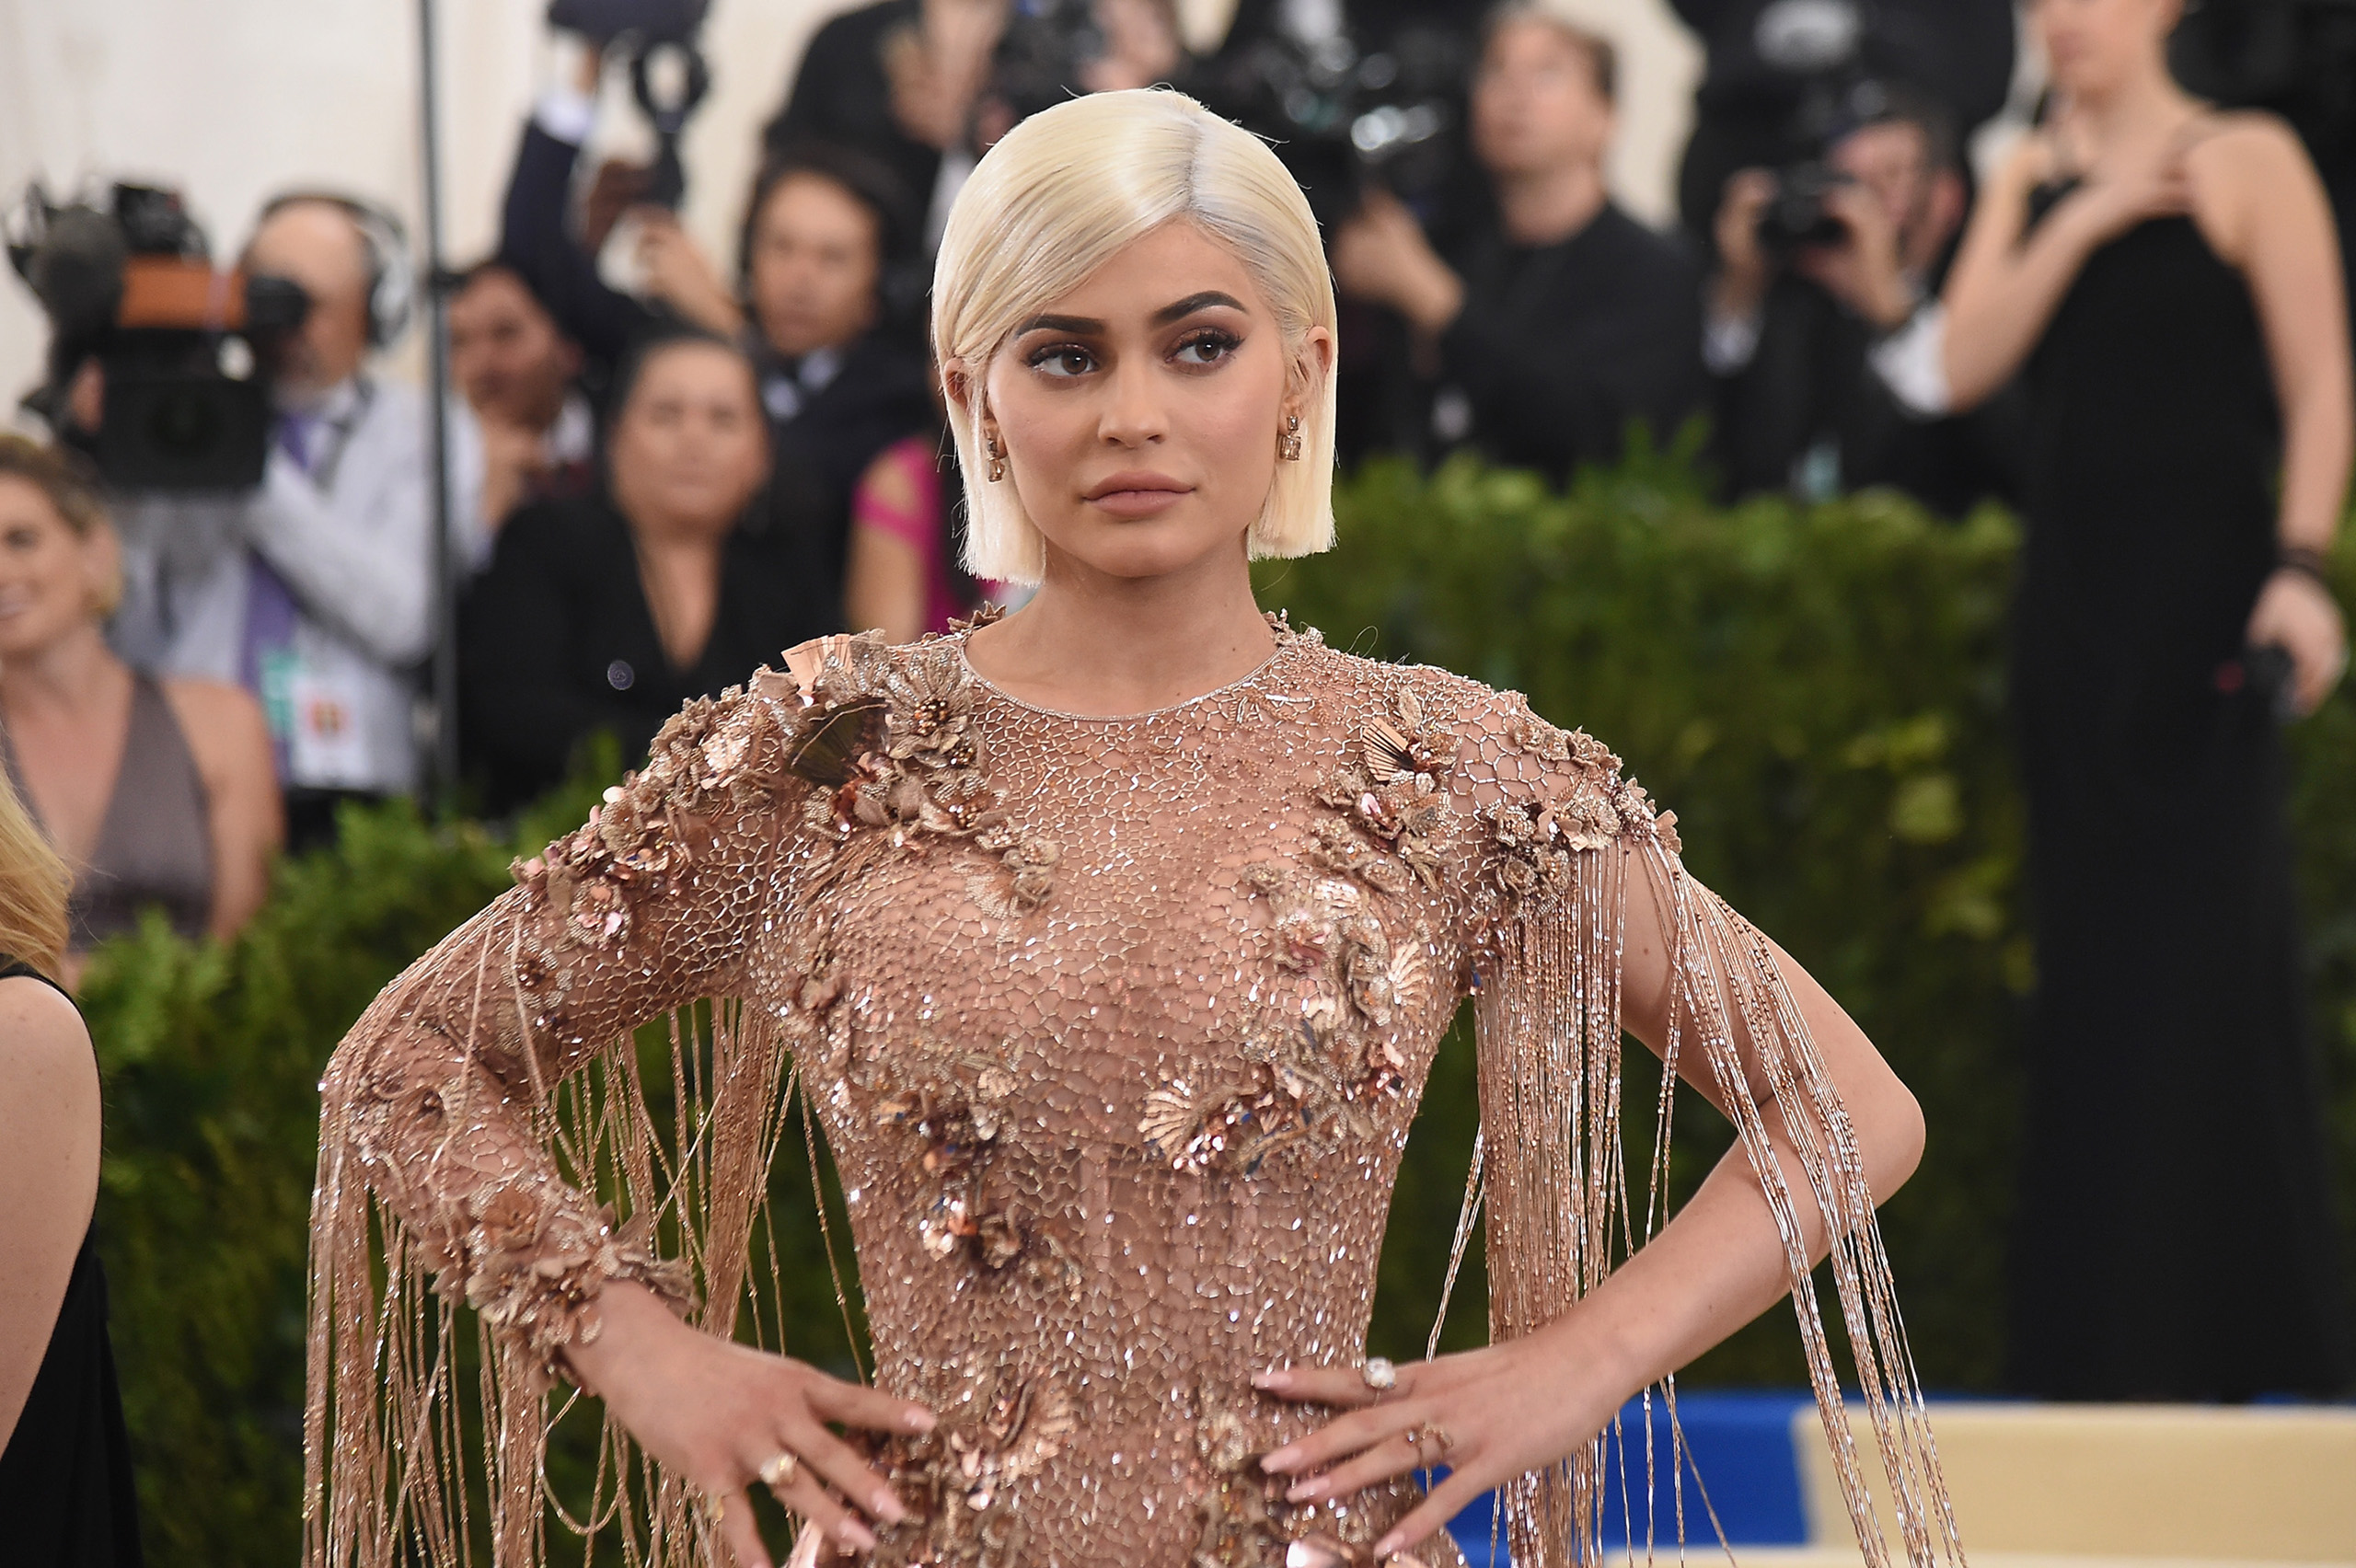 Kylie Jenner attends the "Rei Kawakubo/Comme des Garcons: Art Of The In-Between" Costume Institute Gala at Metropolitan Museum of Art on May 1, 2017 in New York City. (Nicholas Hunt—Huffington Post/Getty Images)